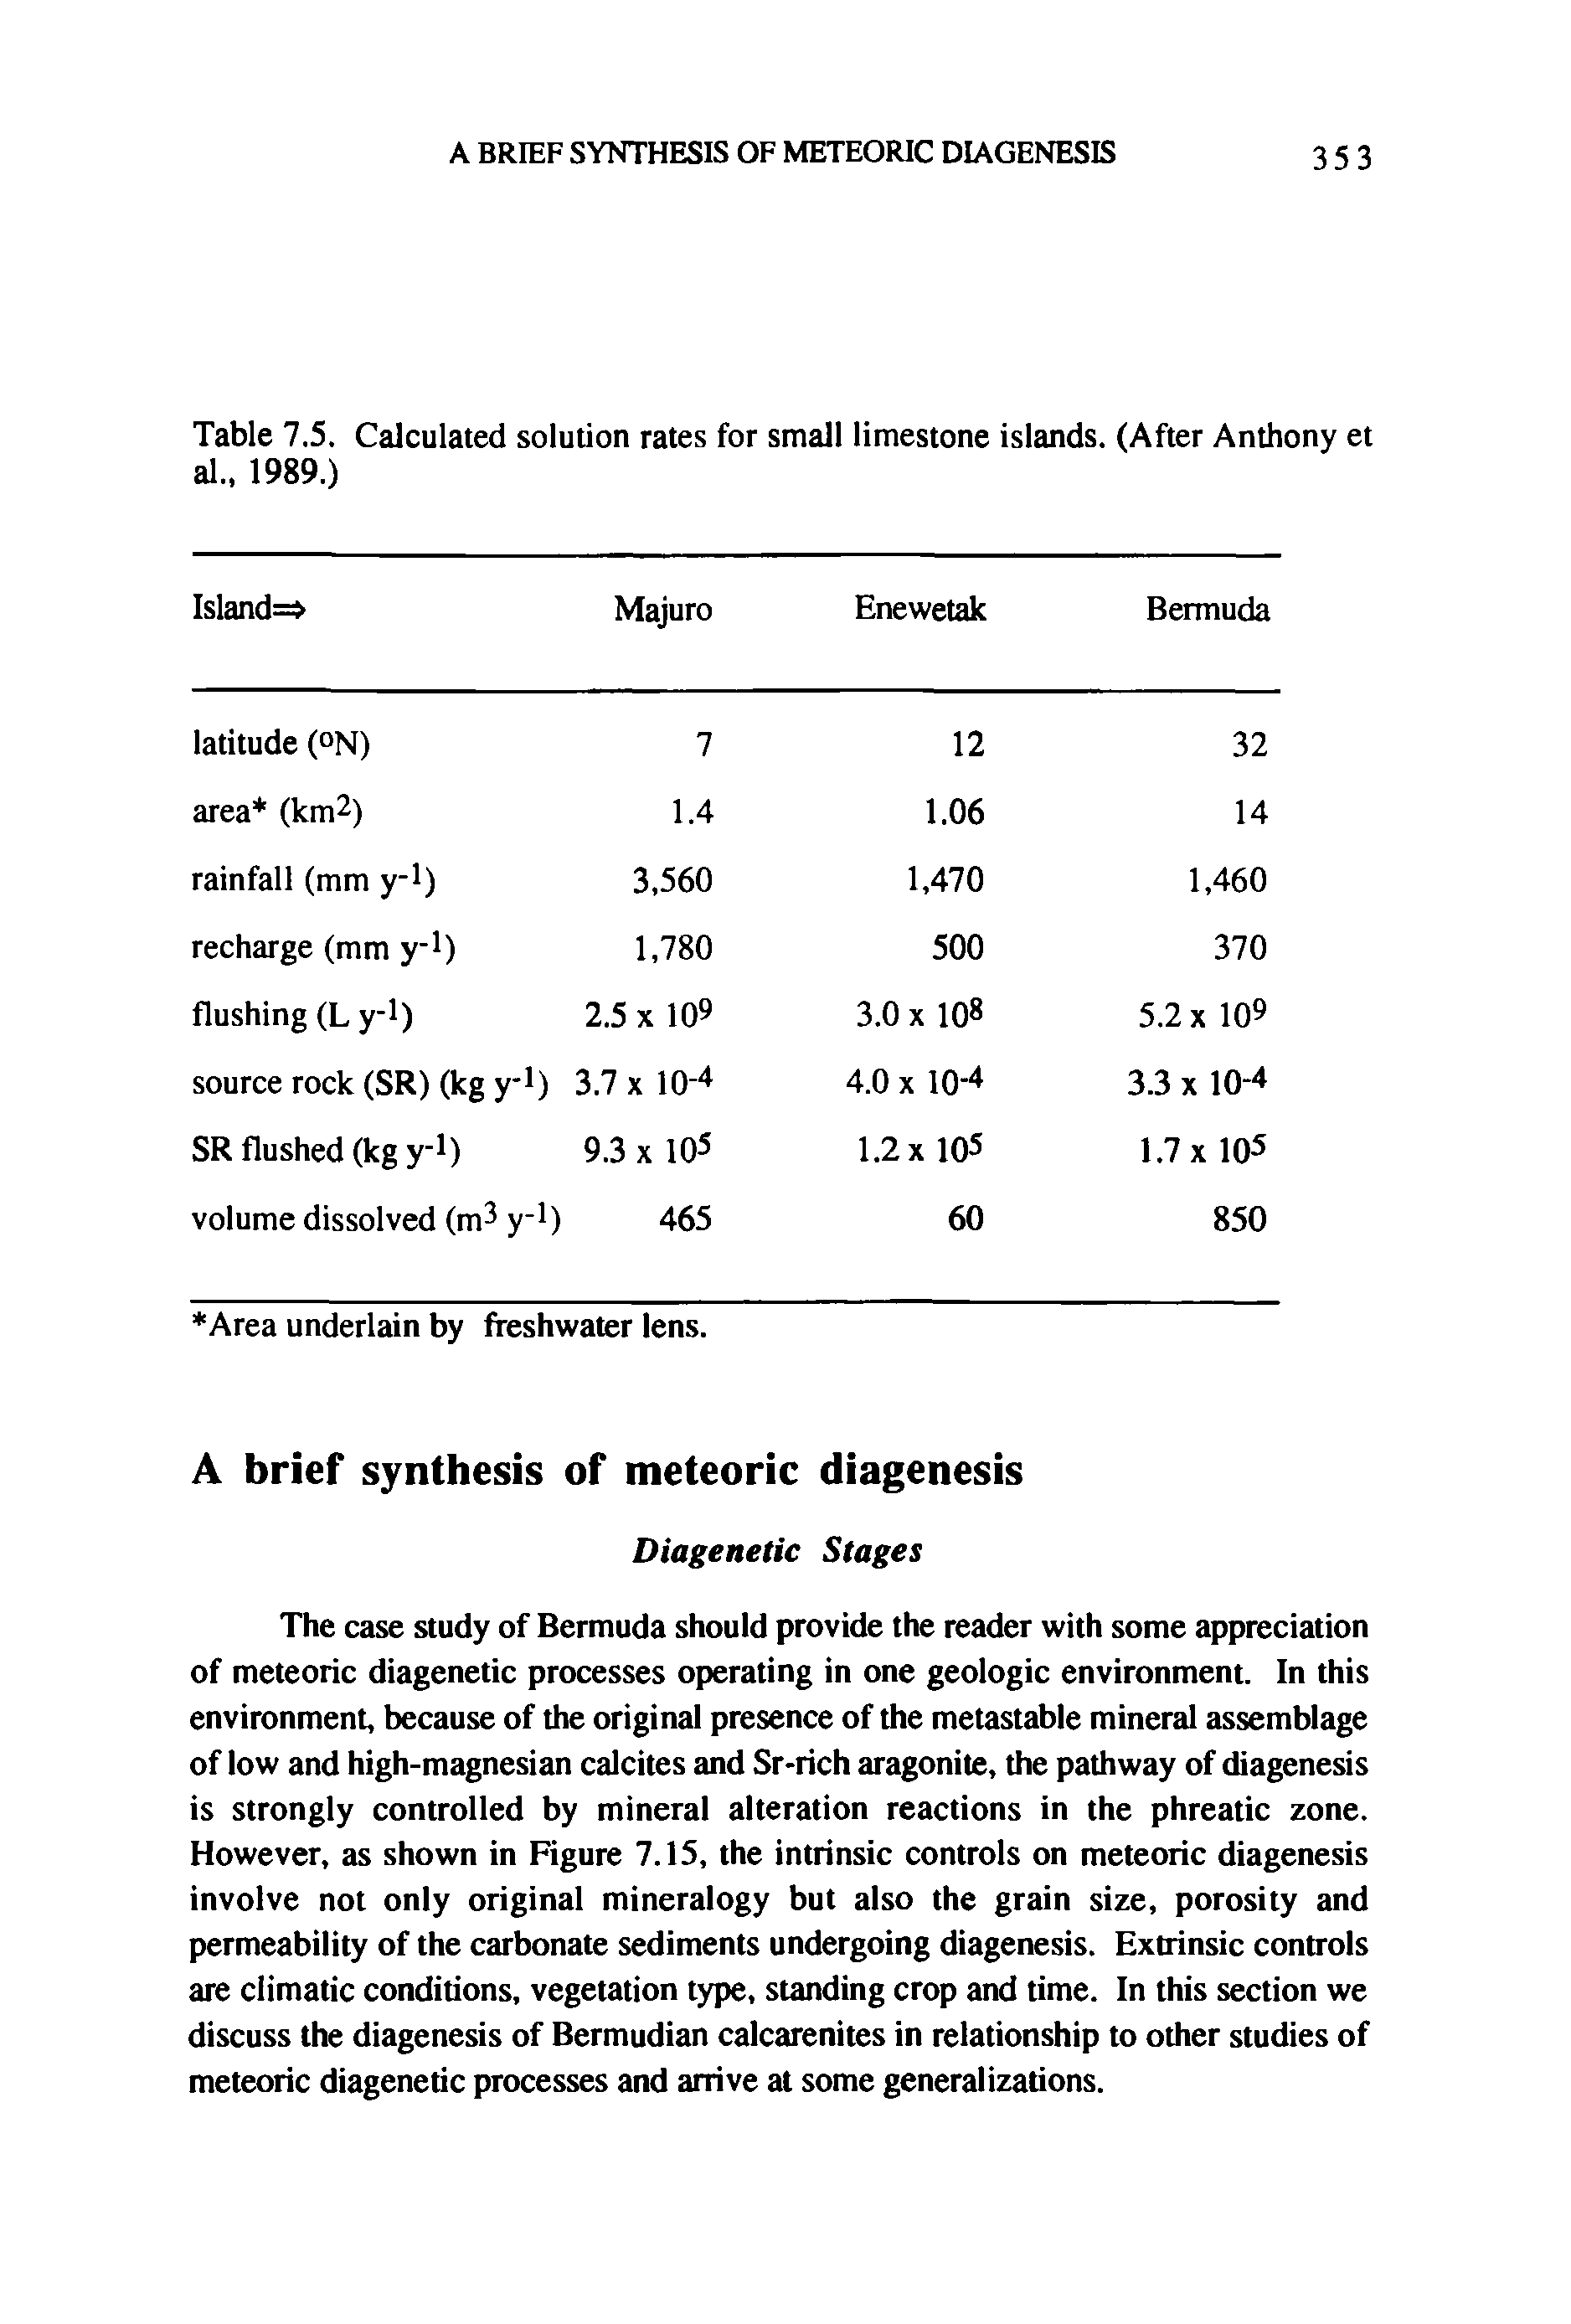 Table 7.5. Calculated solution rates for small limestone islands. (After Anthony et al., 1989.)...